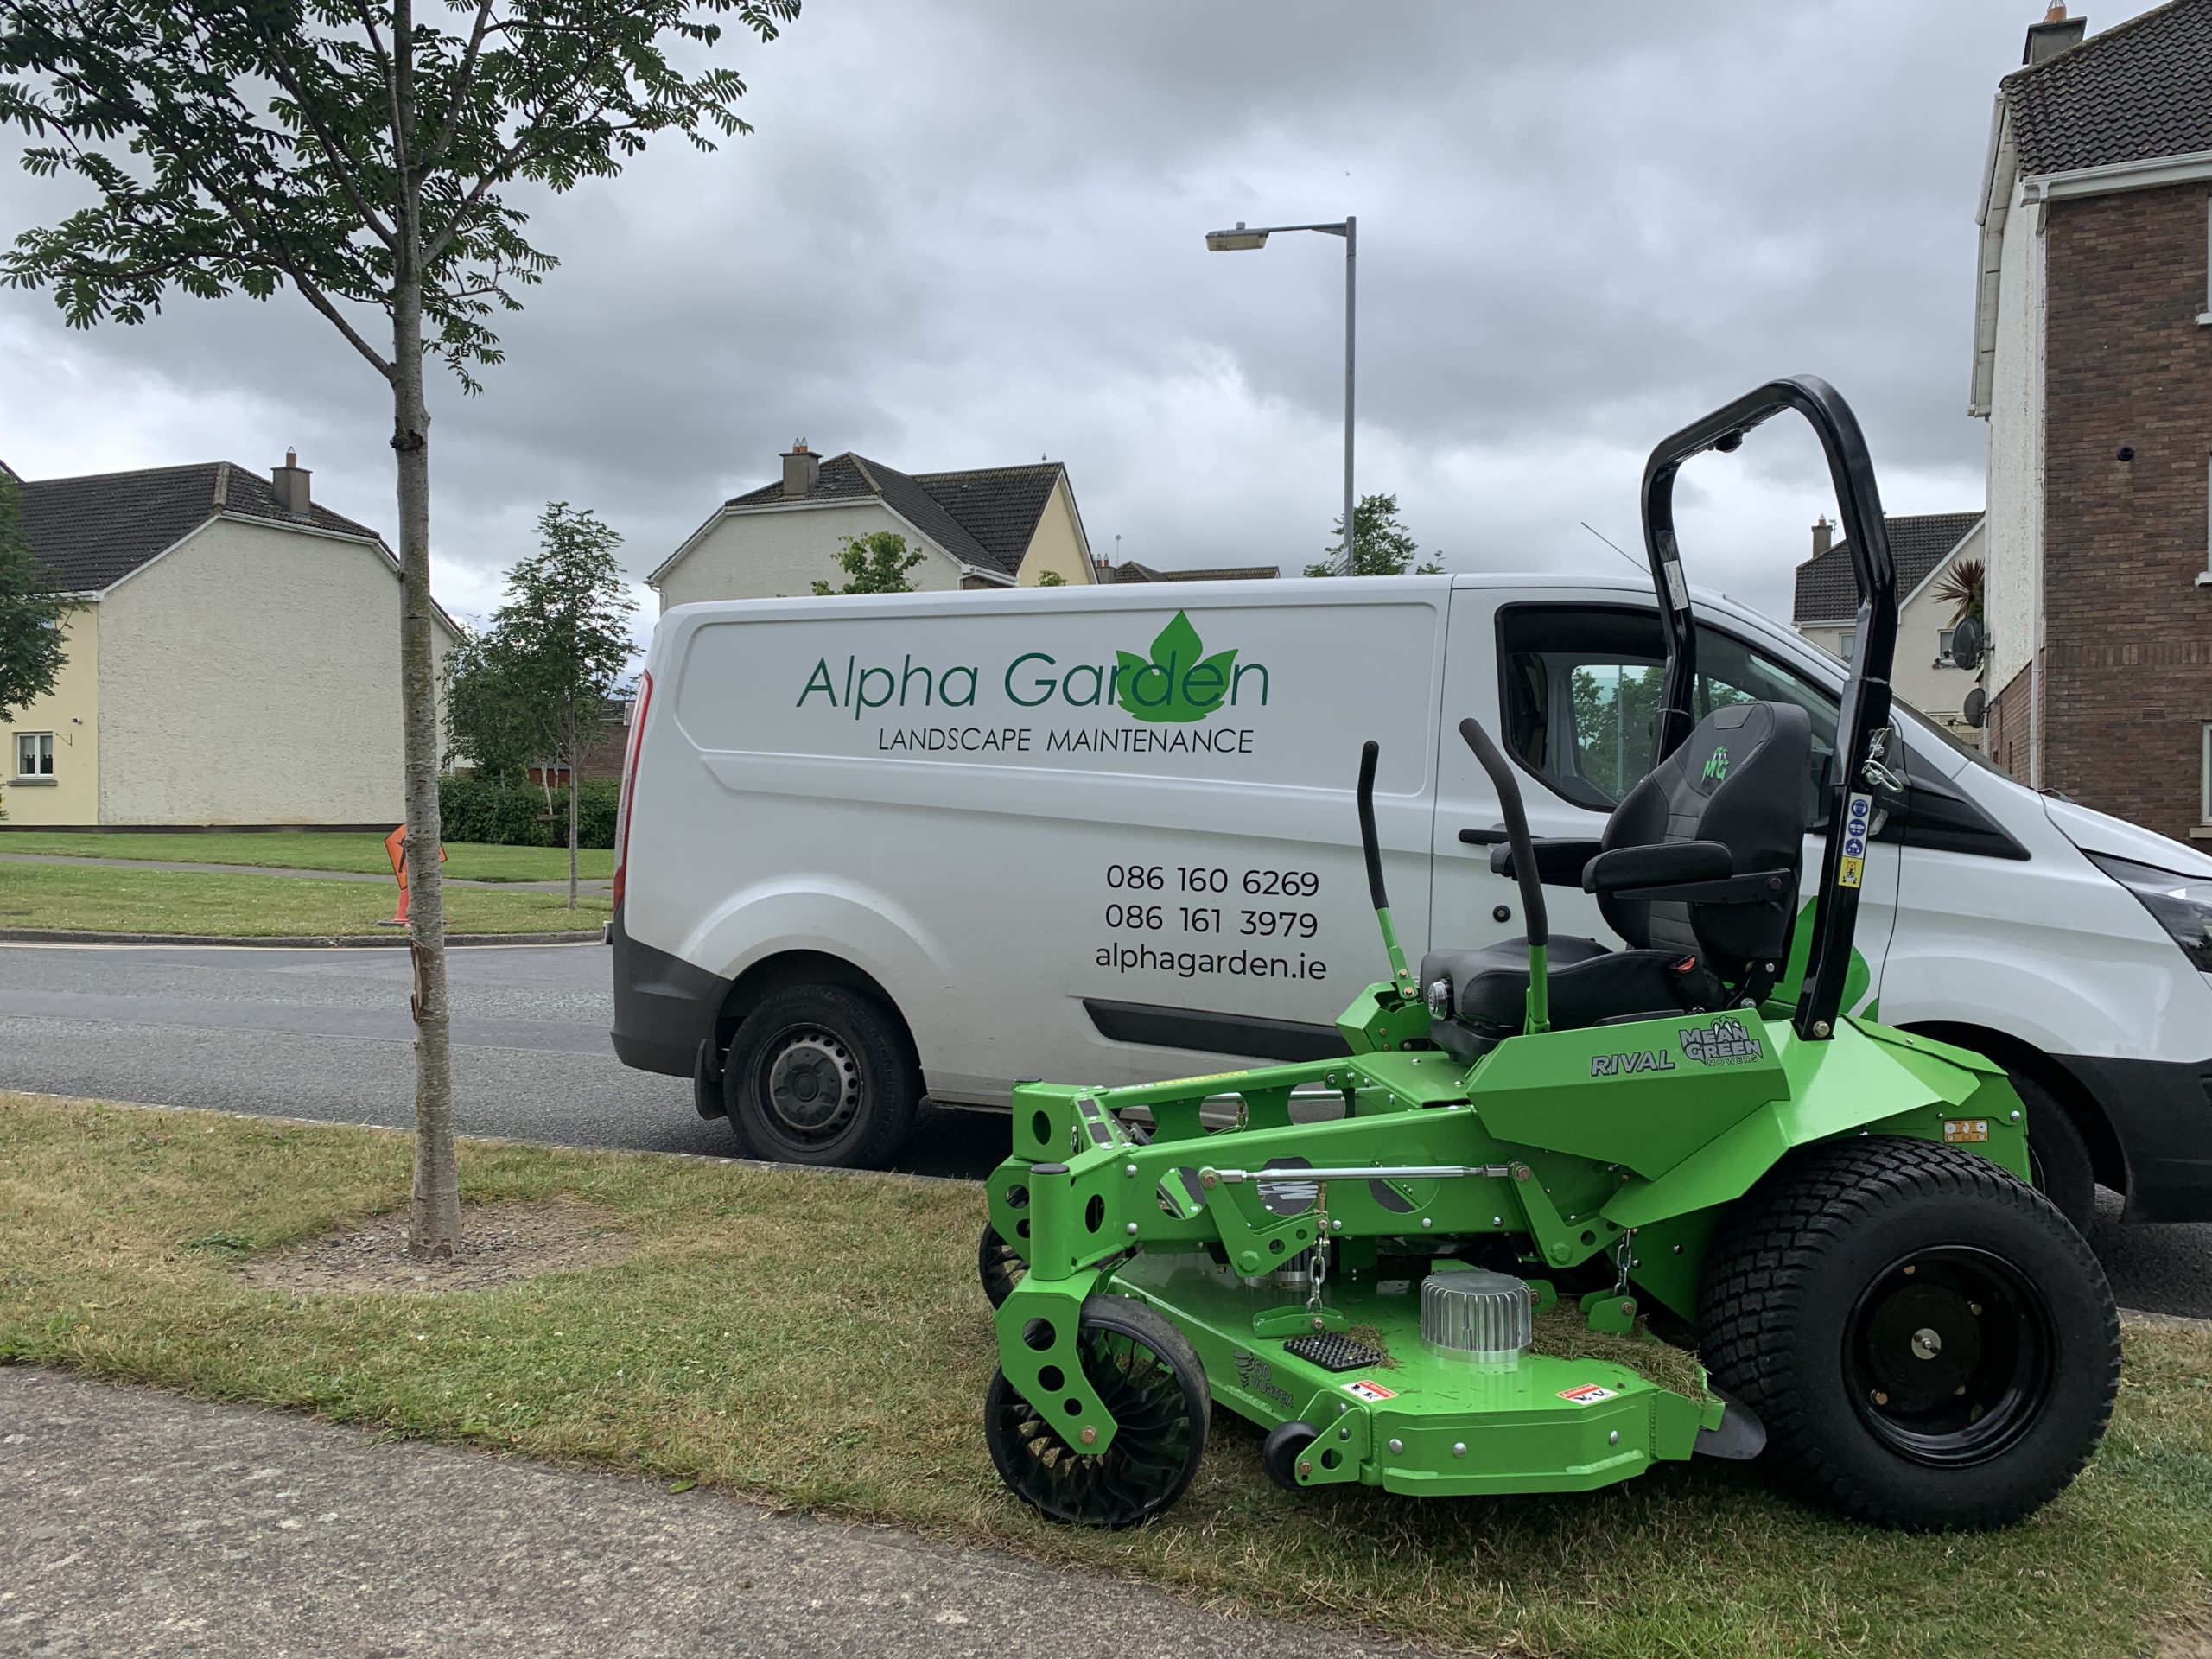 Coming Soon ….. Fully Electric Mean Green Mowing Machine.